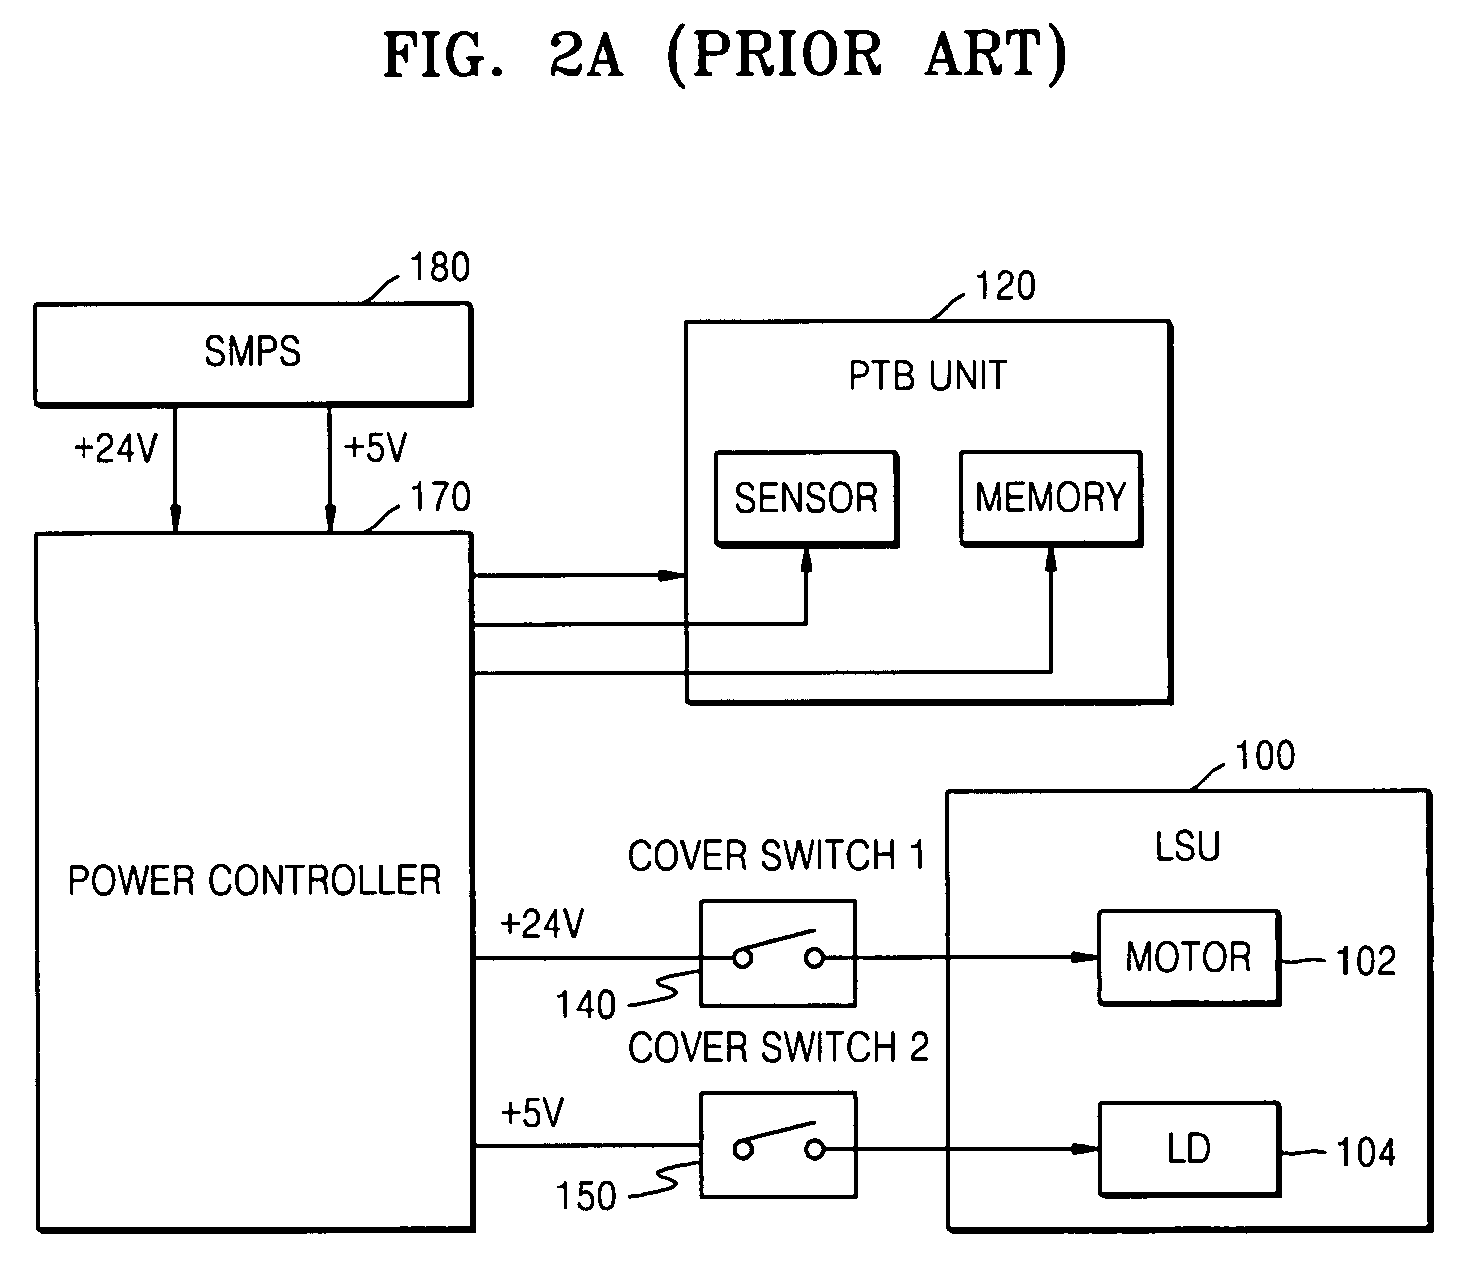 Power control apparatus and method of using a power control apparatus in an image forming device